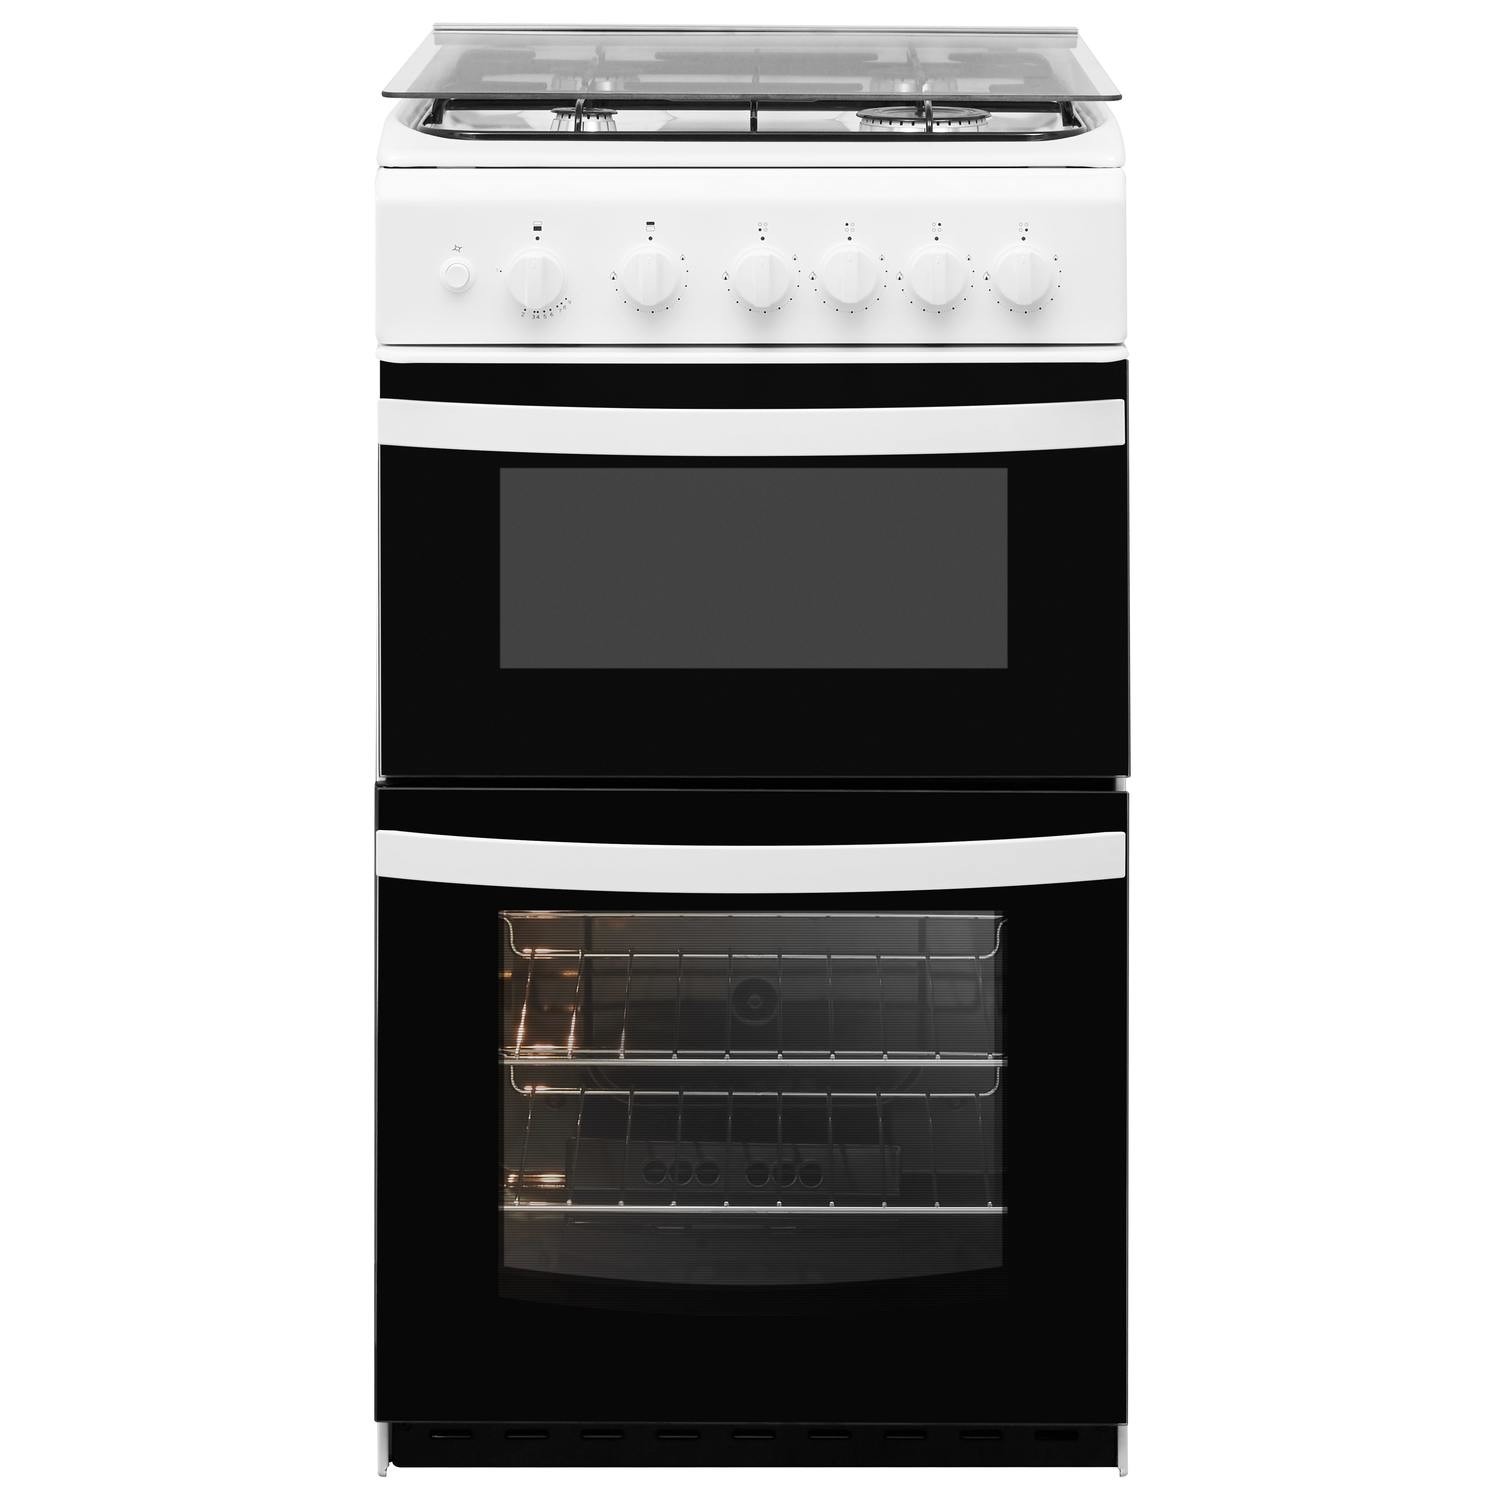 Indesit Cloe ID5G00KMW/L 50cm Gas Cooker - White - A Rated